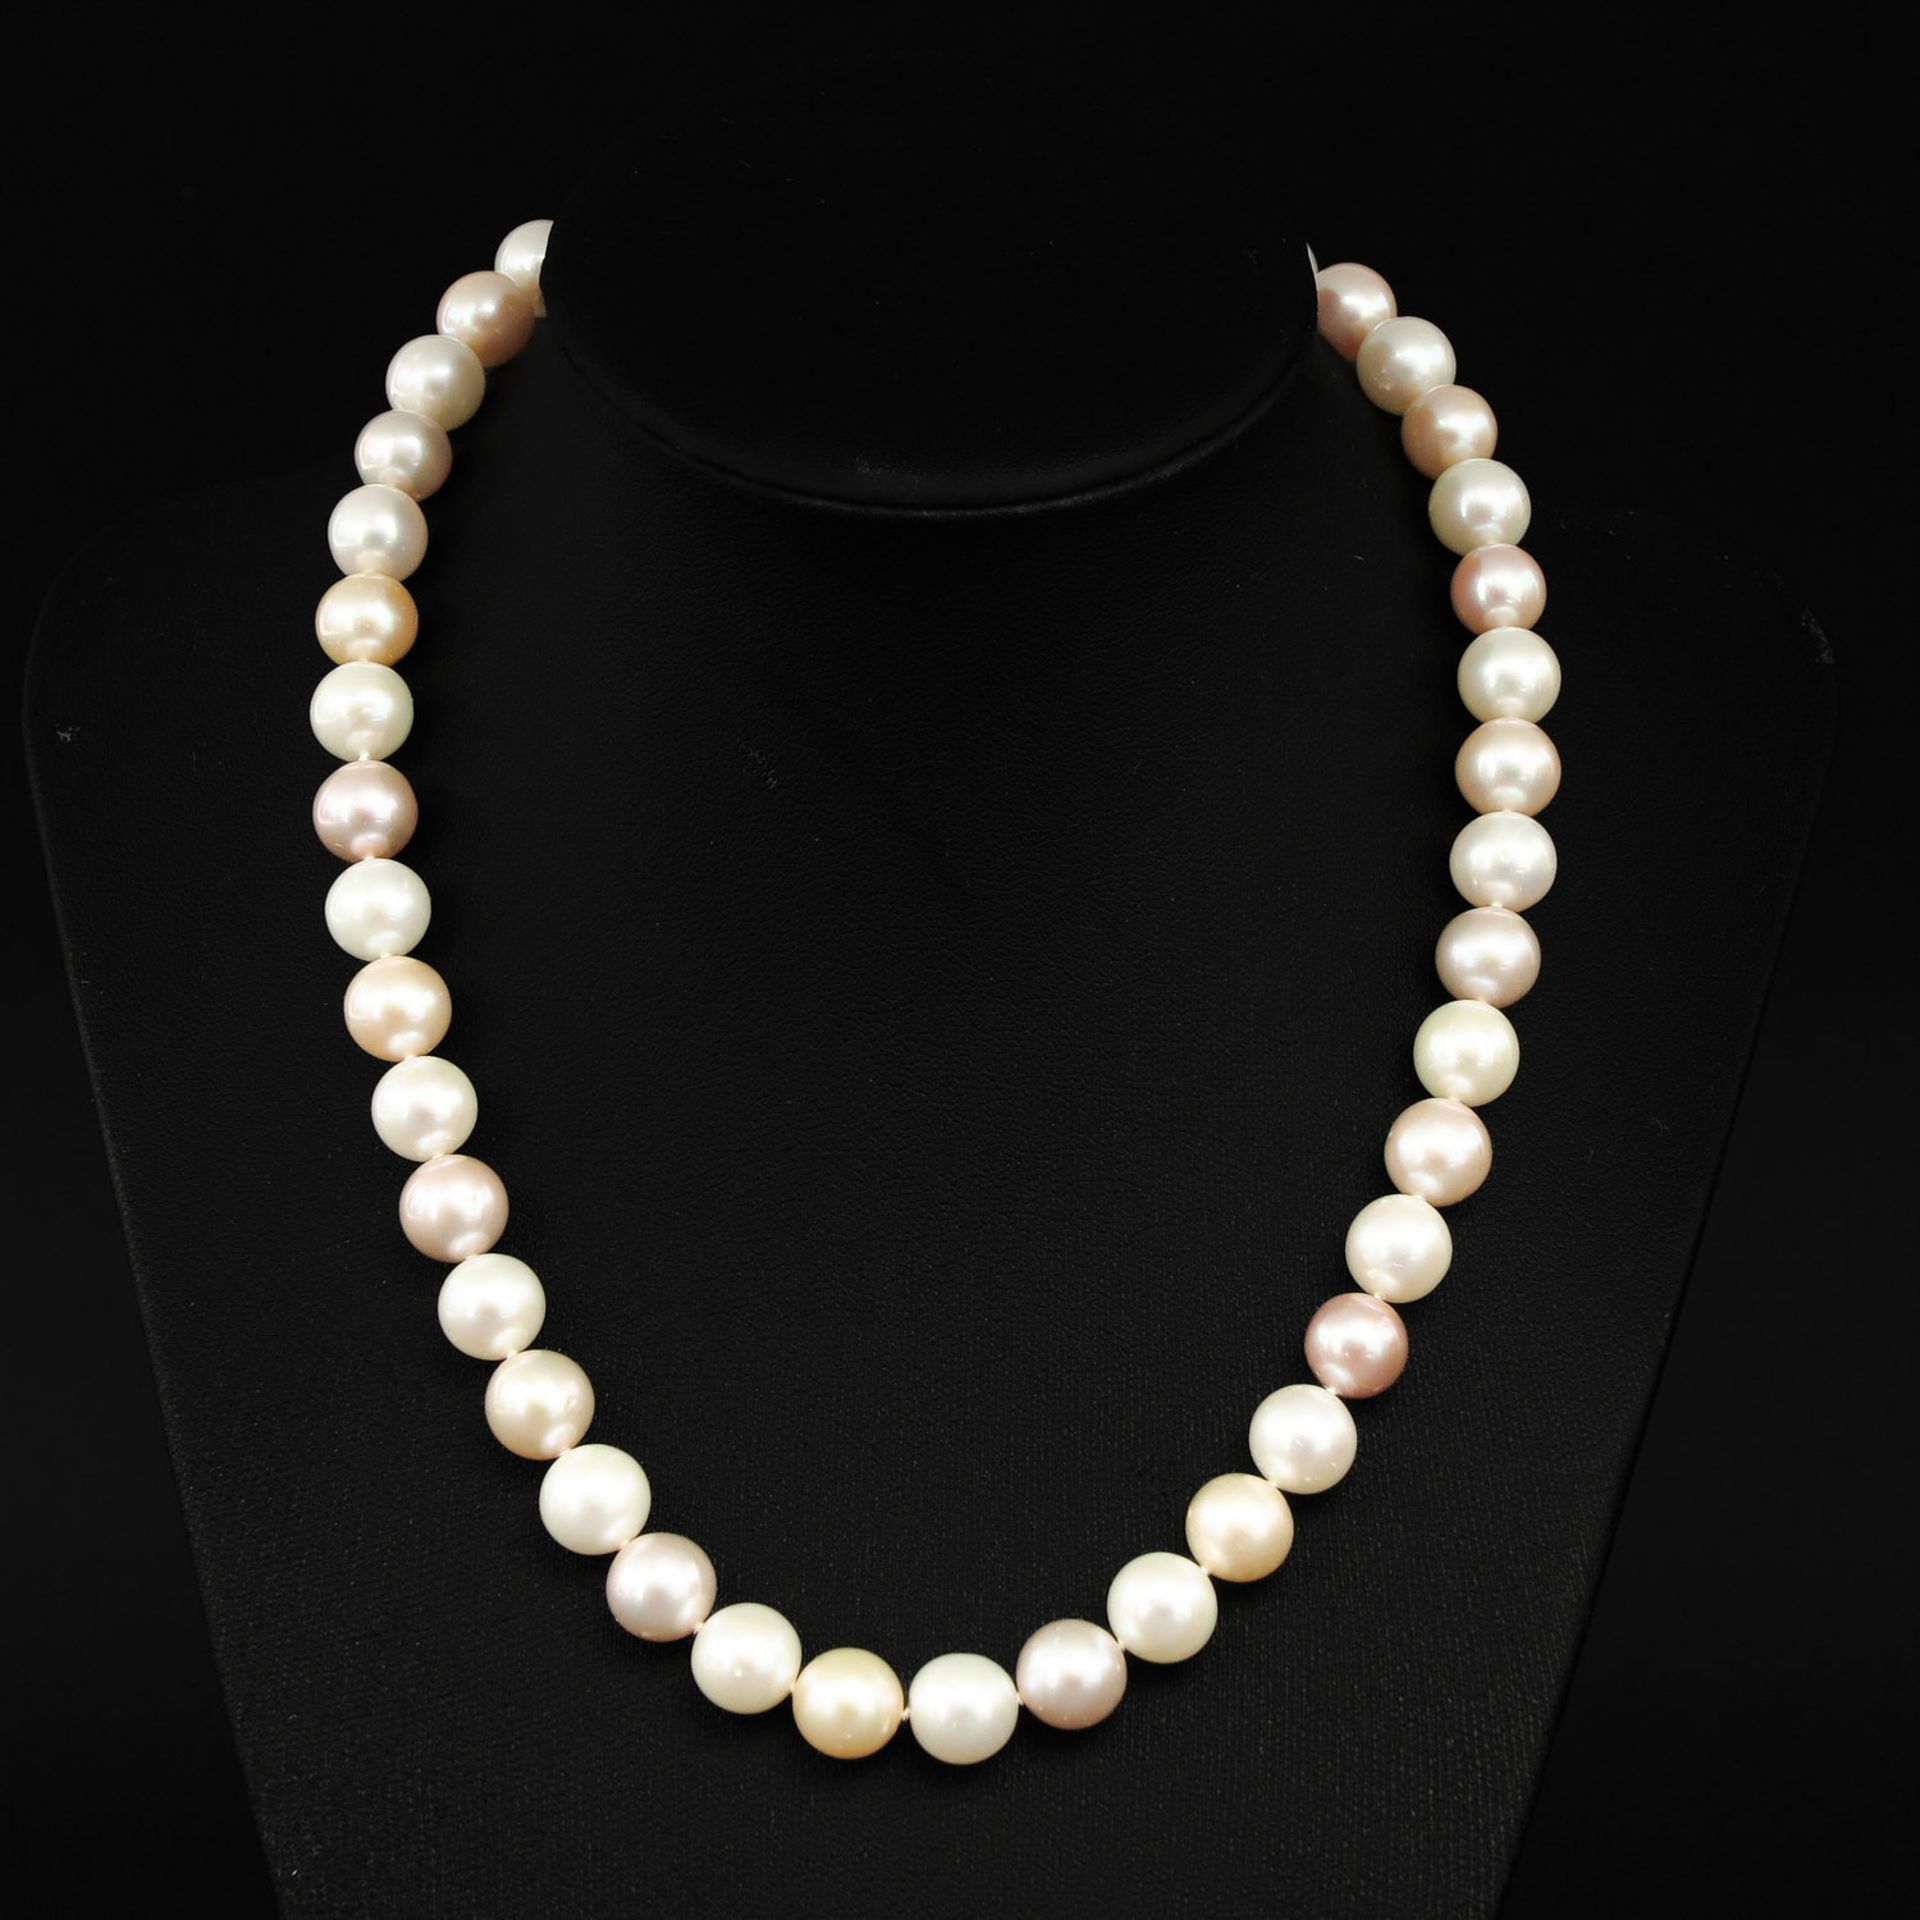 A Single Strand Pearl Necklace